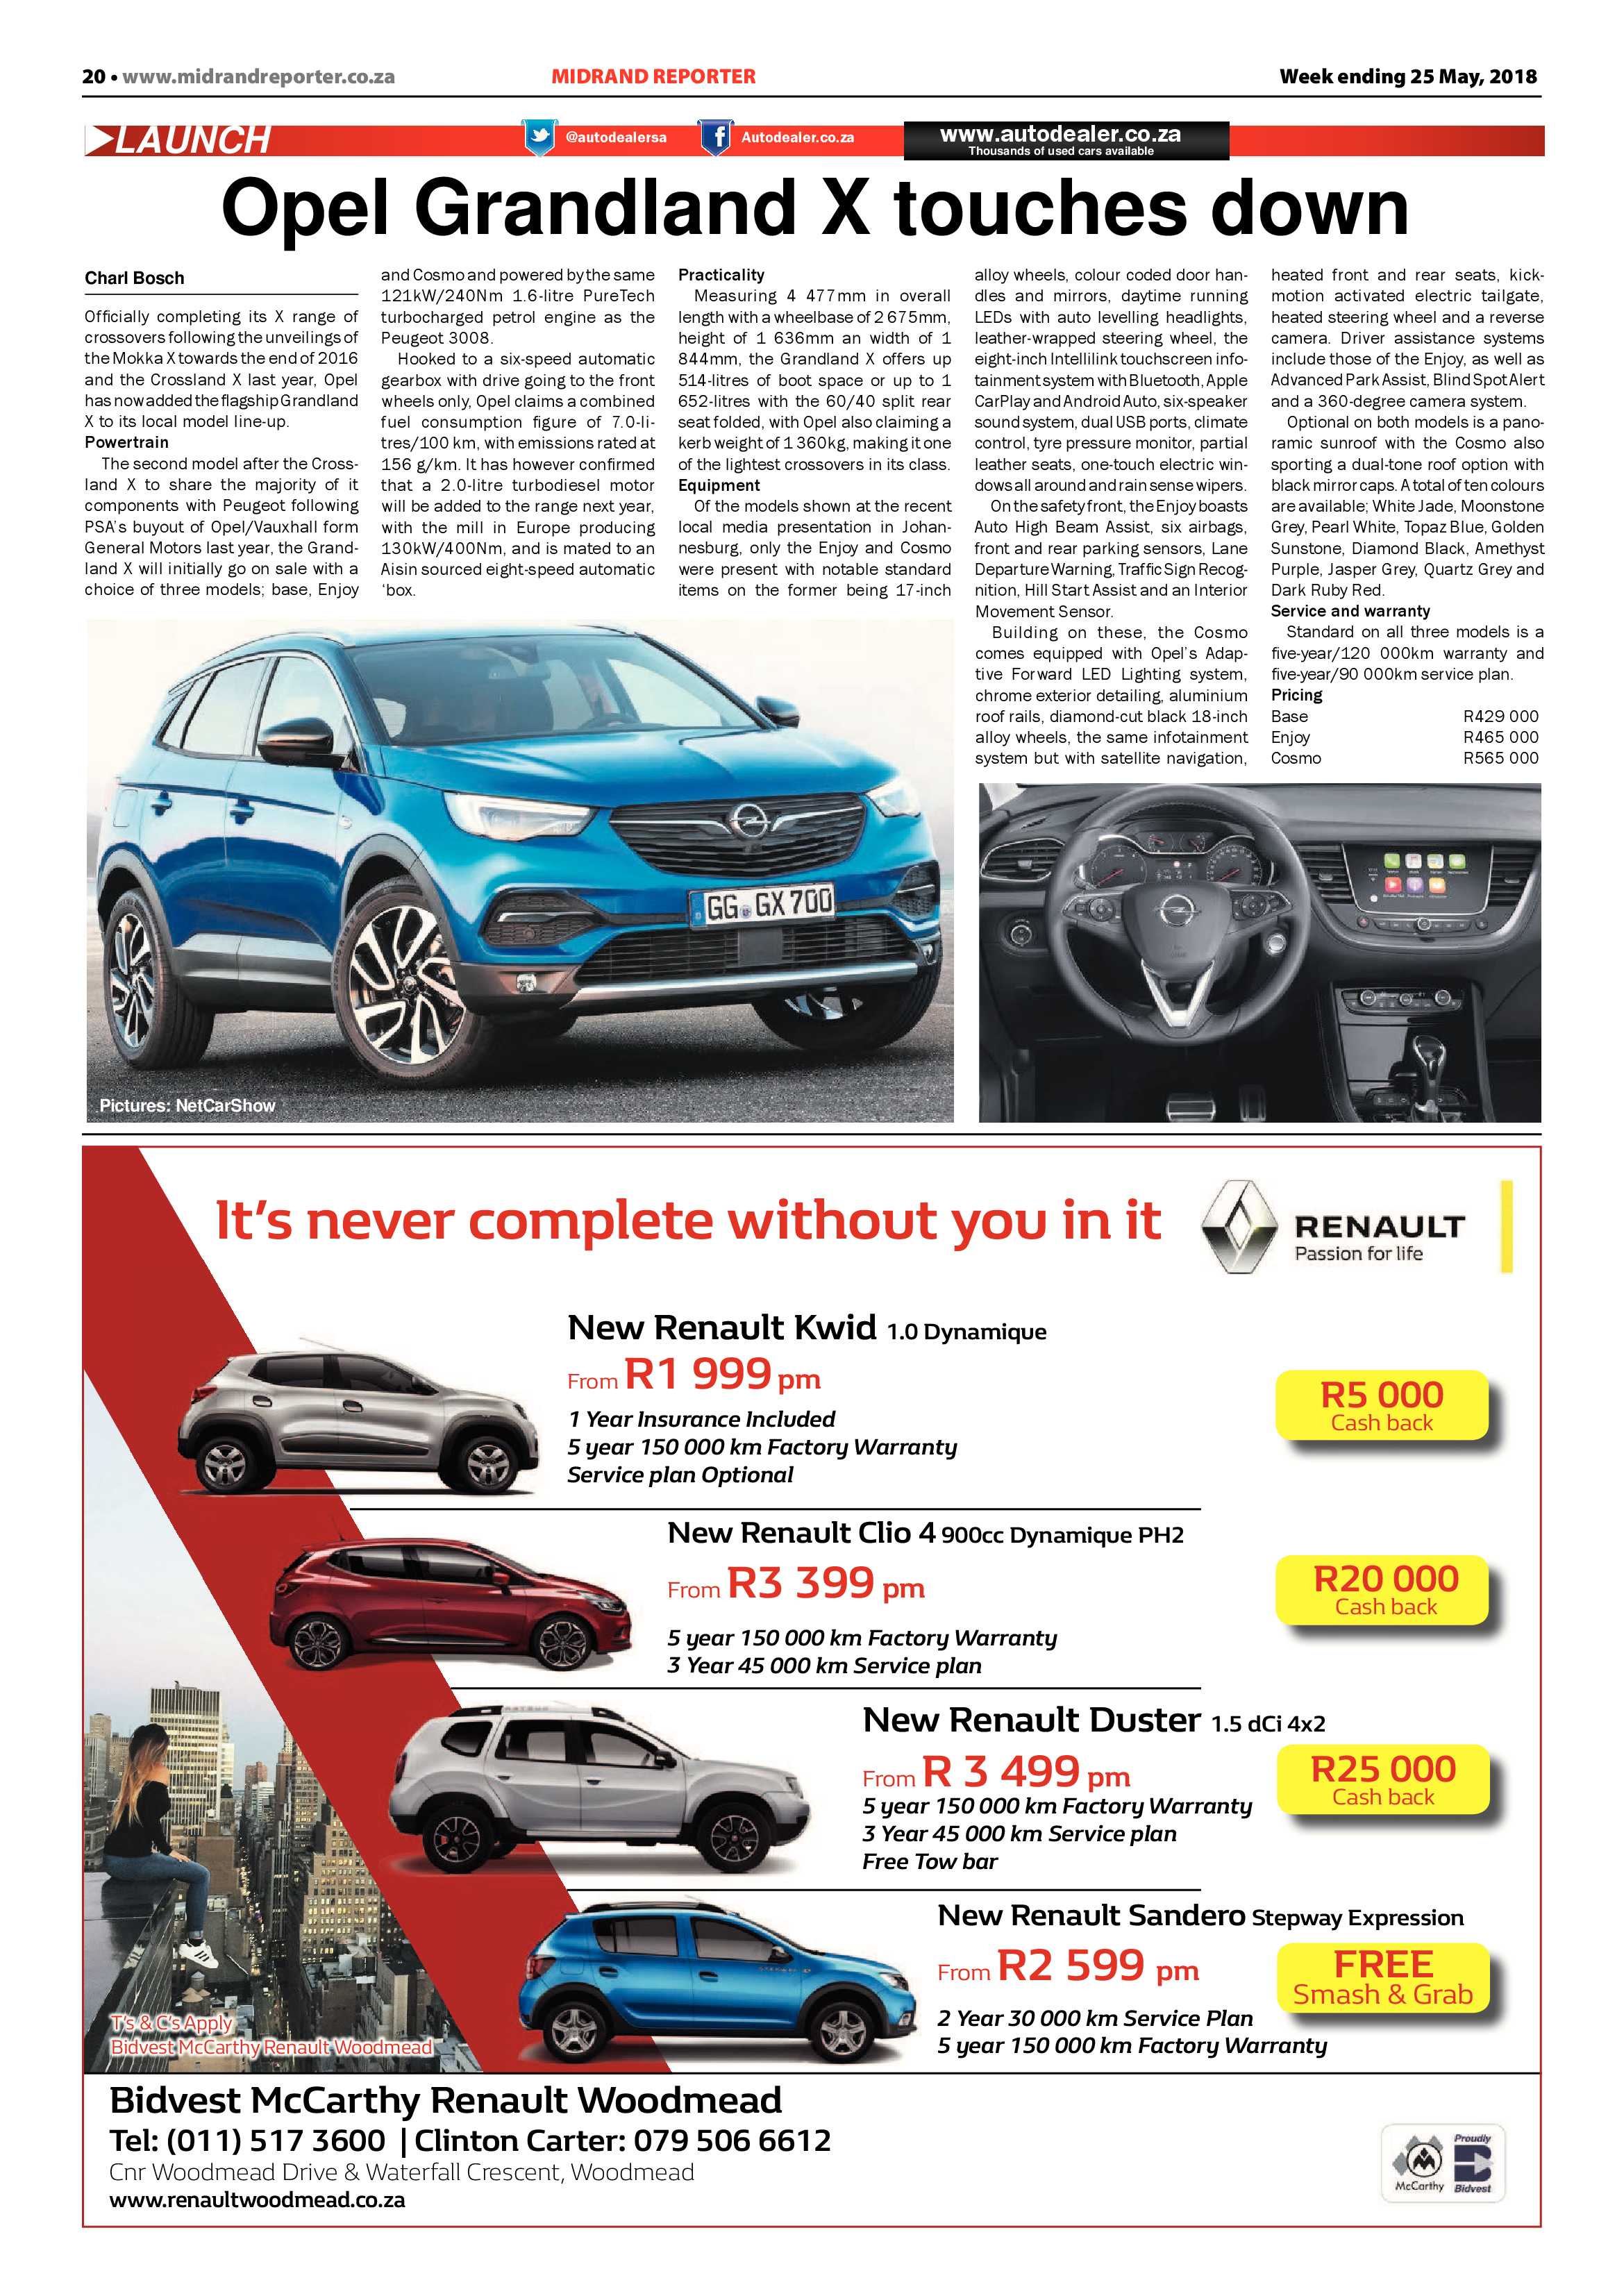 Midrand Reporter 25 May 2018 page 20